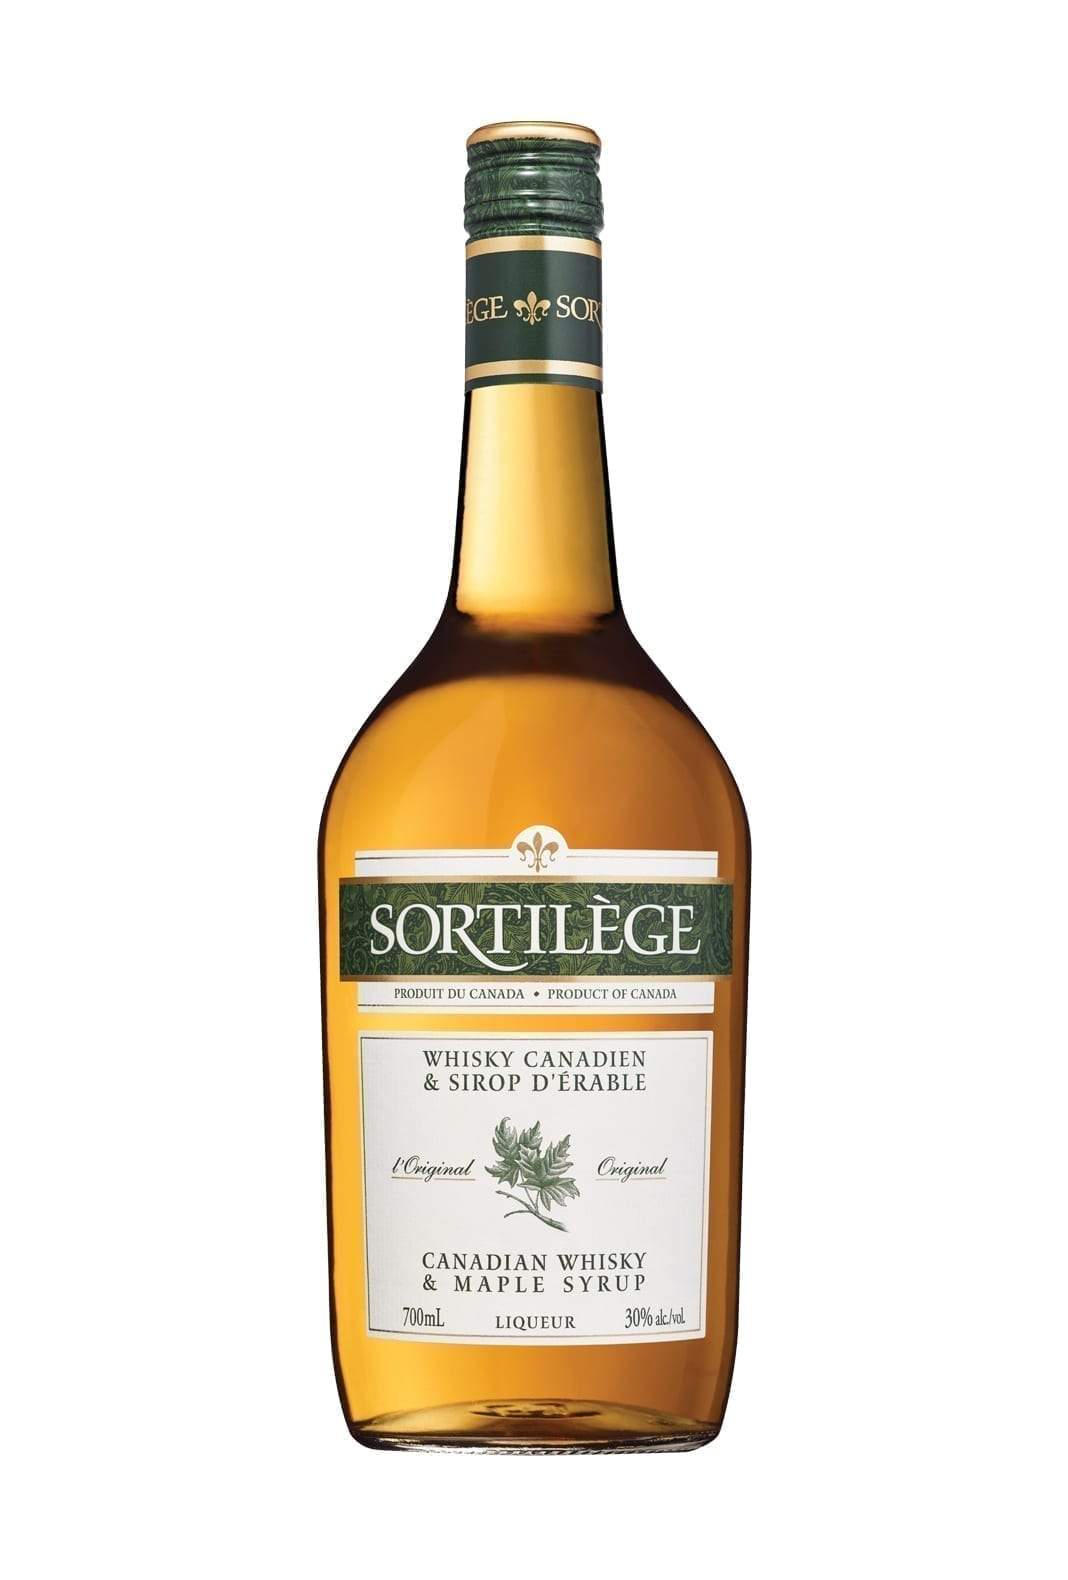 Sortilege Canadian Whisky and Maple Syrup 30% 700ml | Whiskey | Shop online at Spirits of France